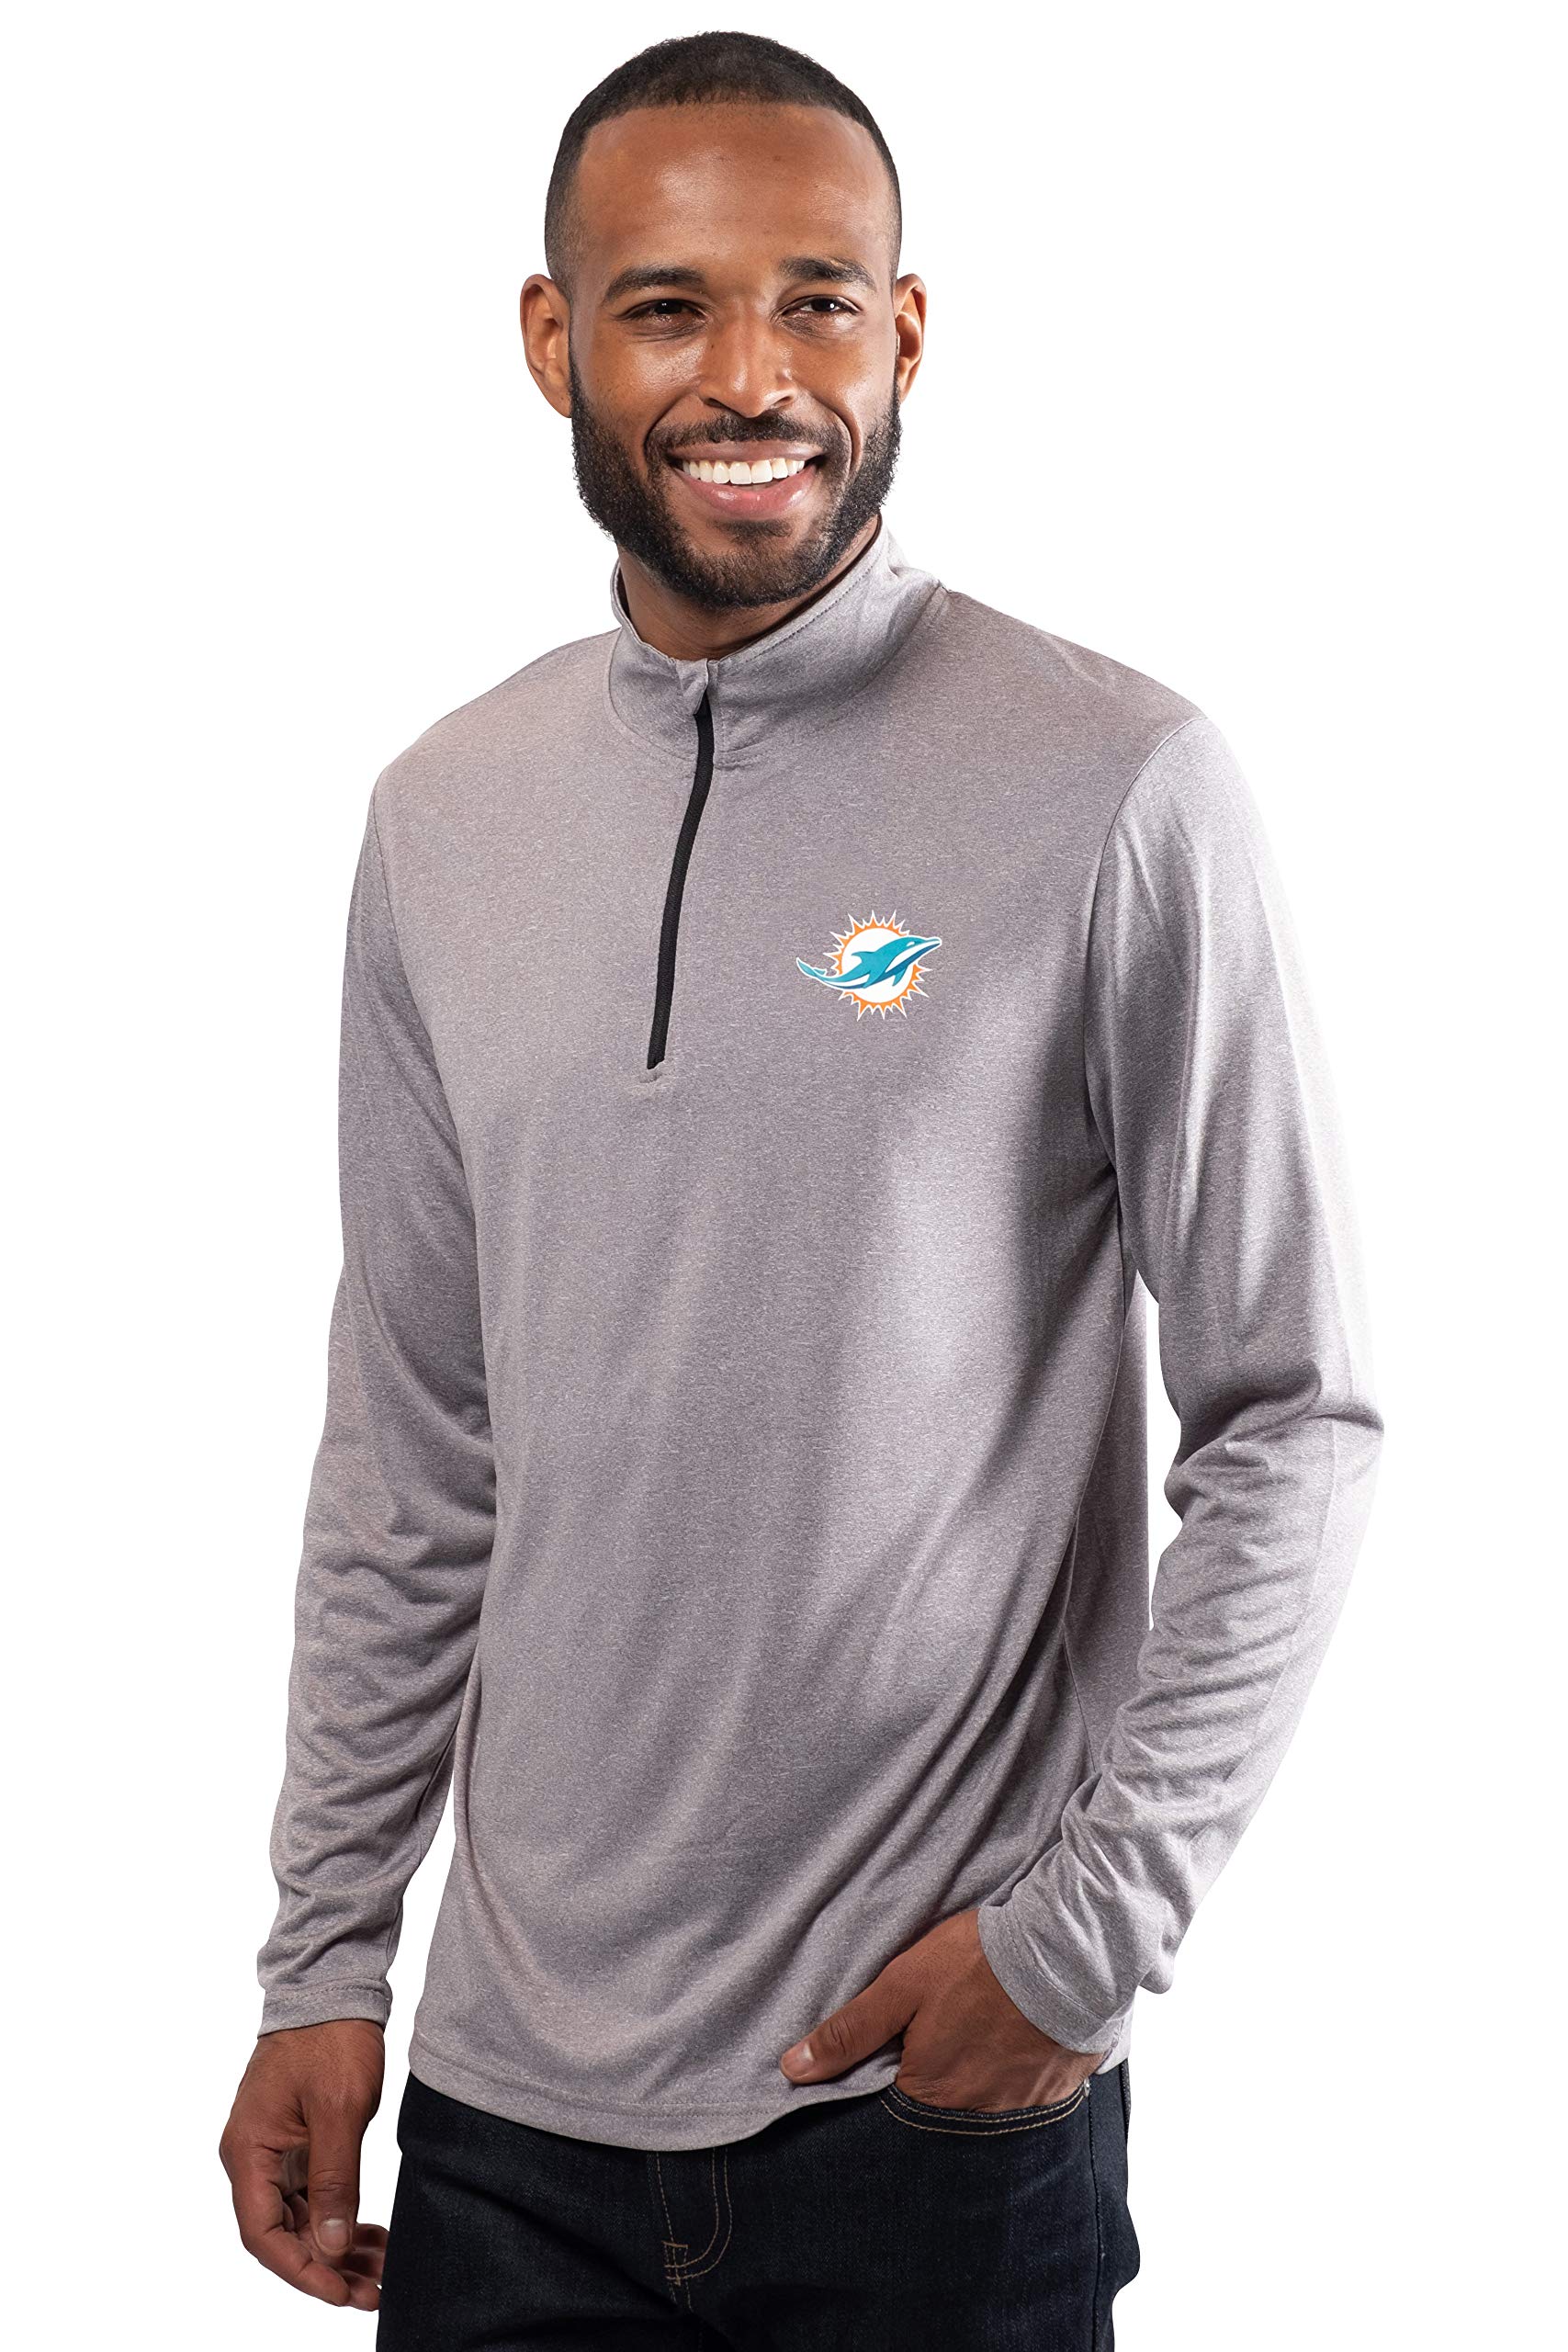 Ultra Game NFL Miami Dolphins Mens Super Soft Quarter Zip Long Sleeve T-Shirt|Miami Dolphins